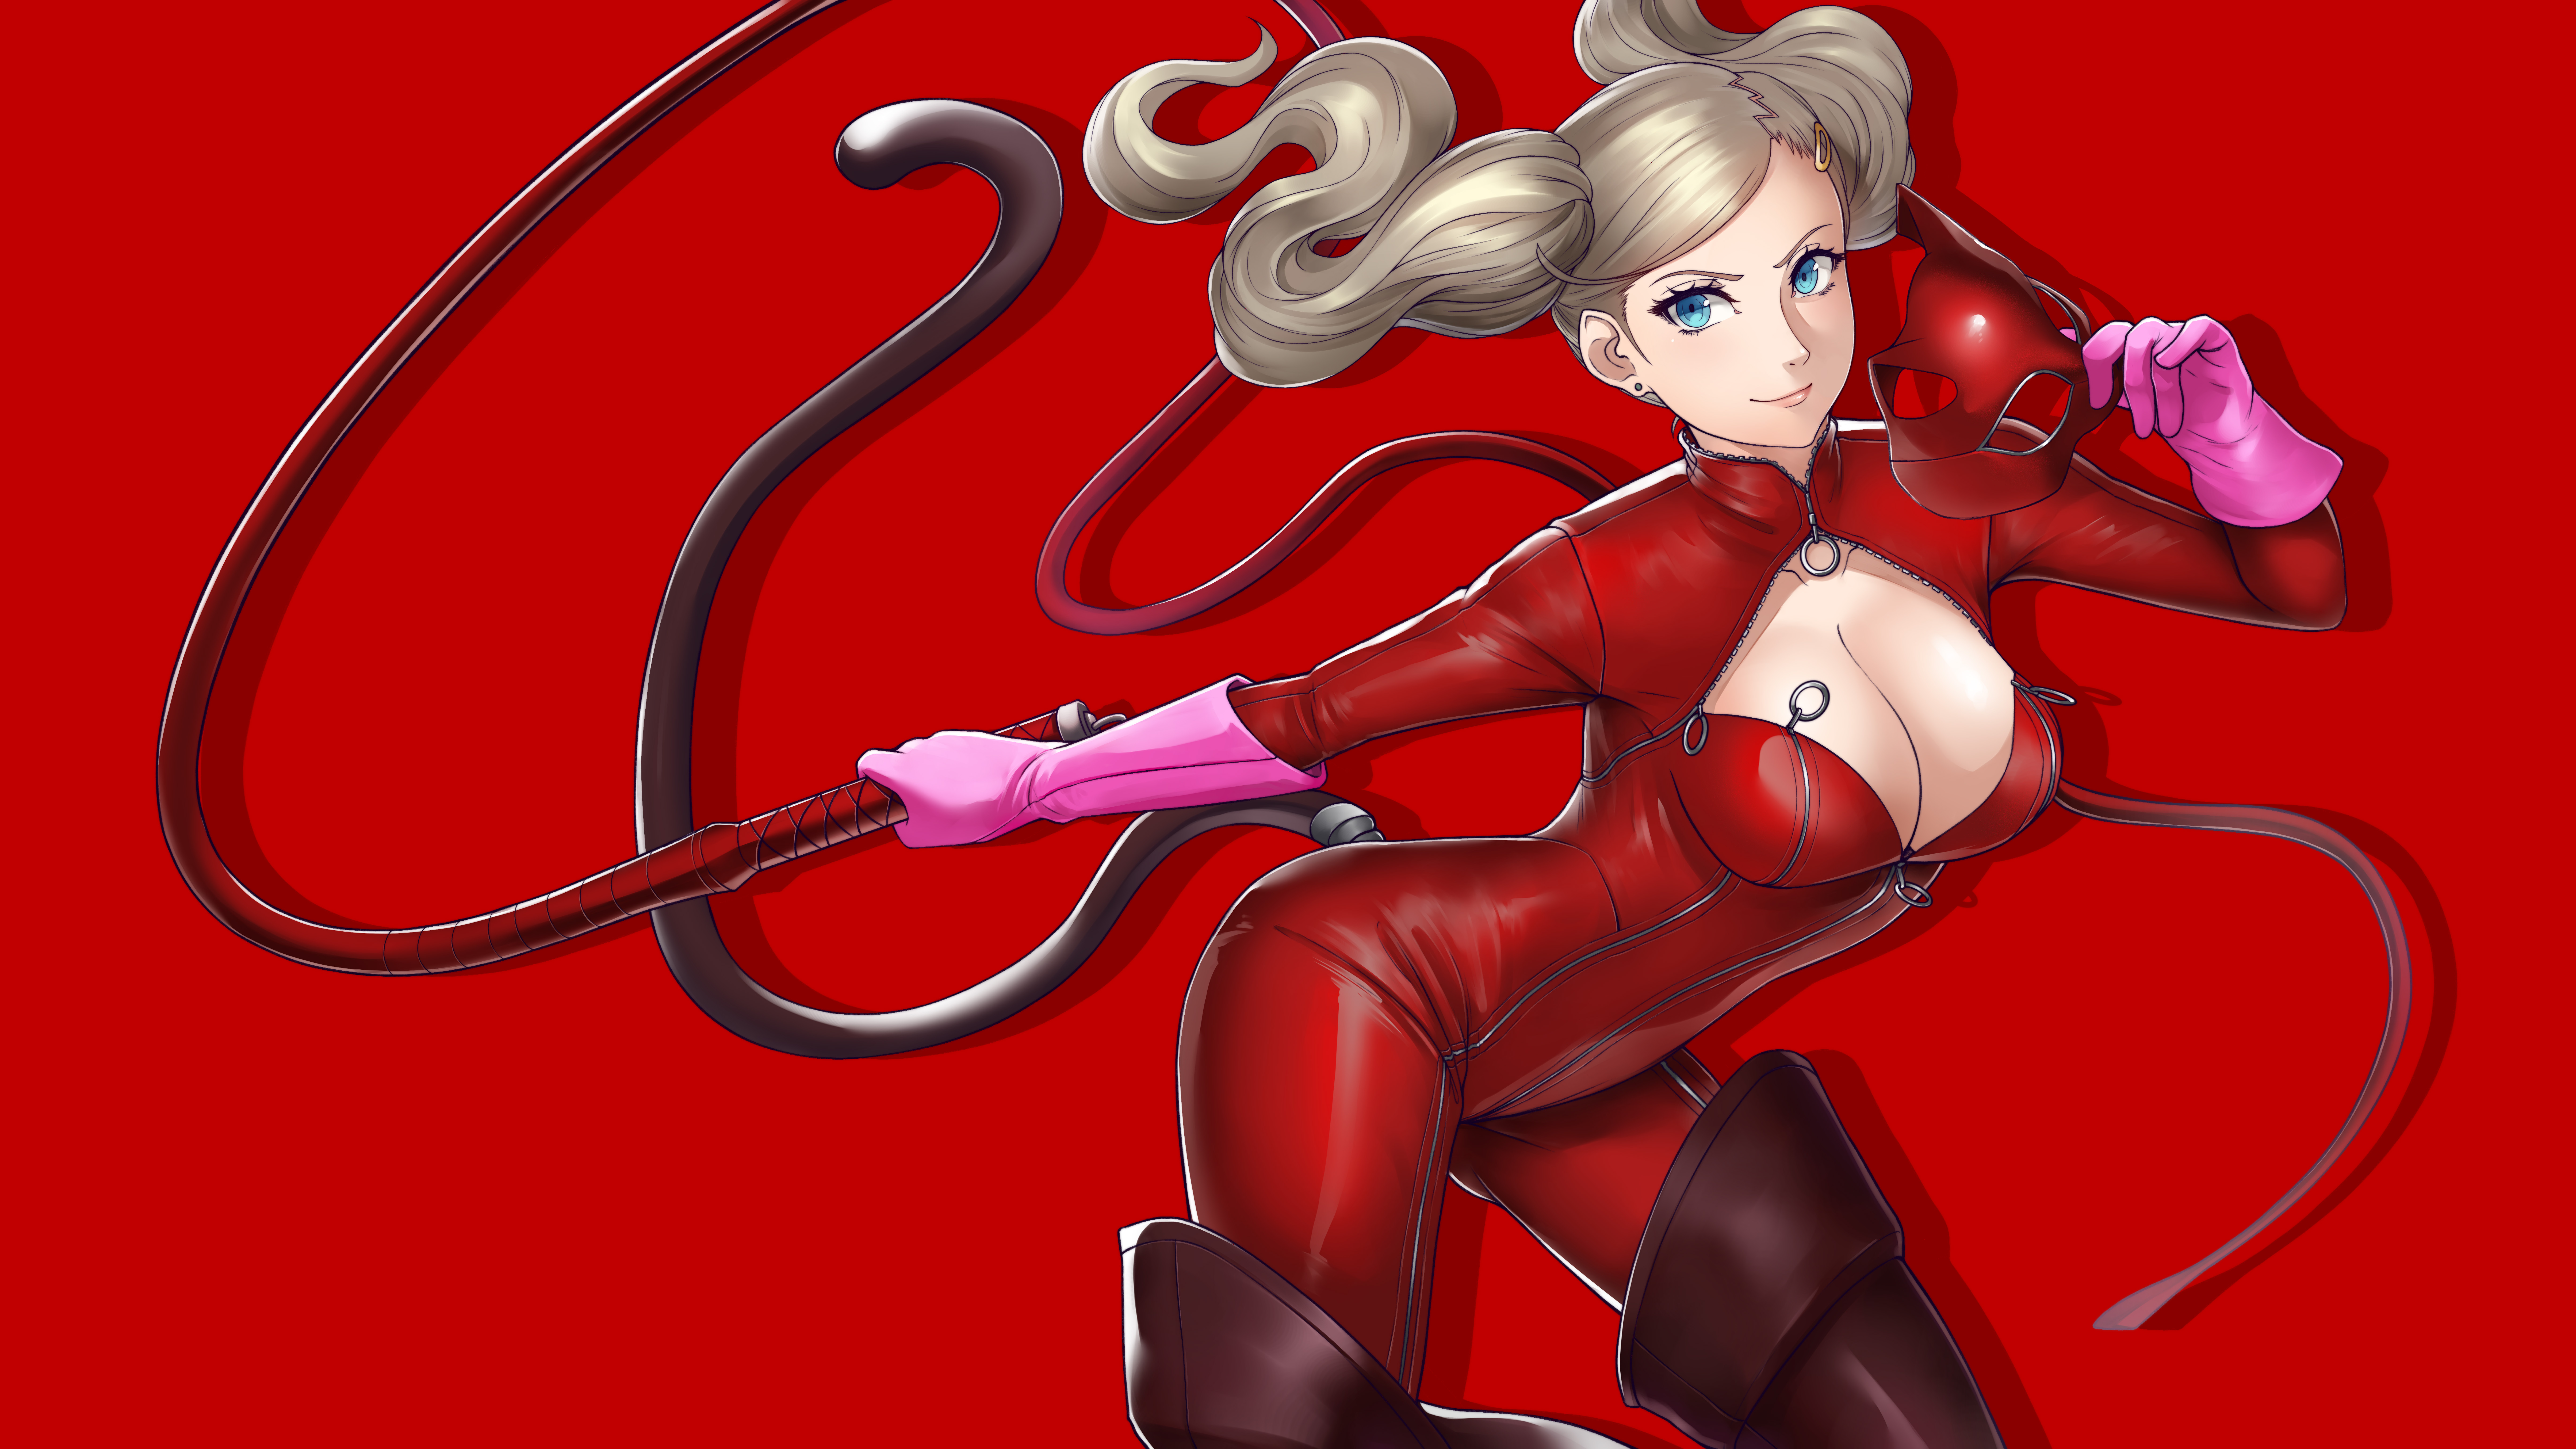 Persona 5 Whips 9631x5417